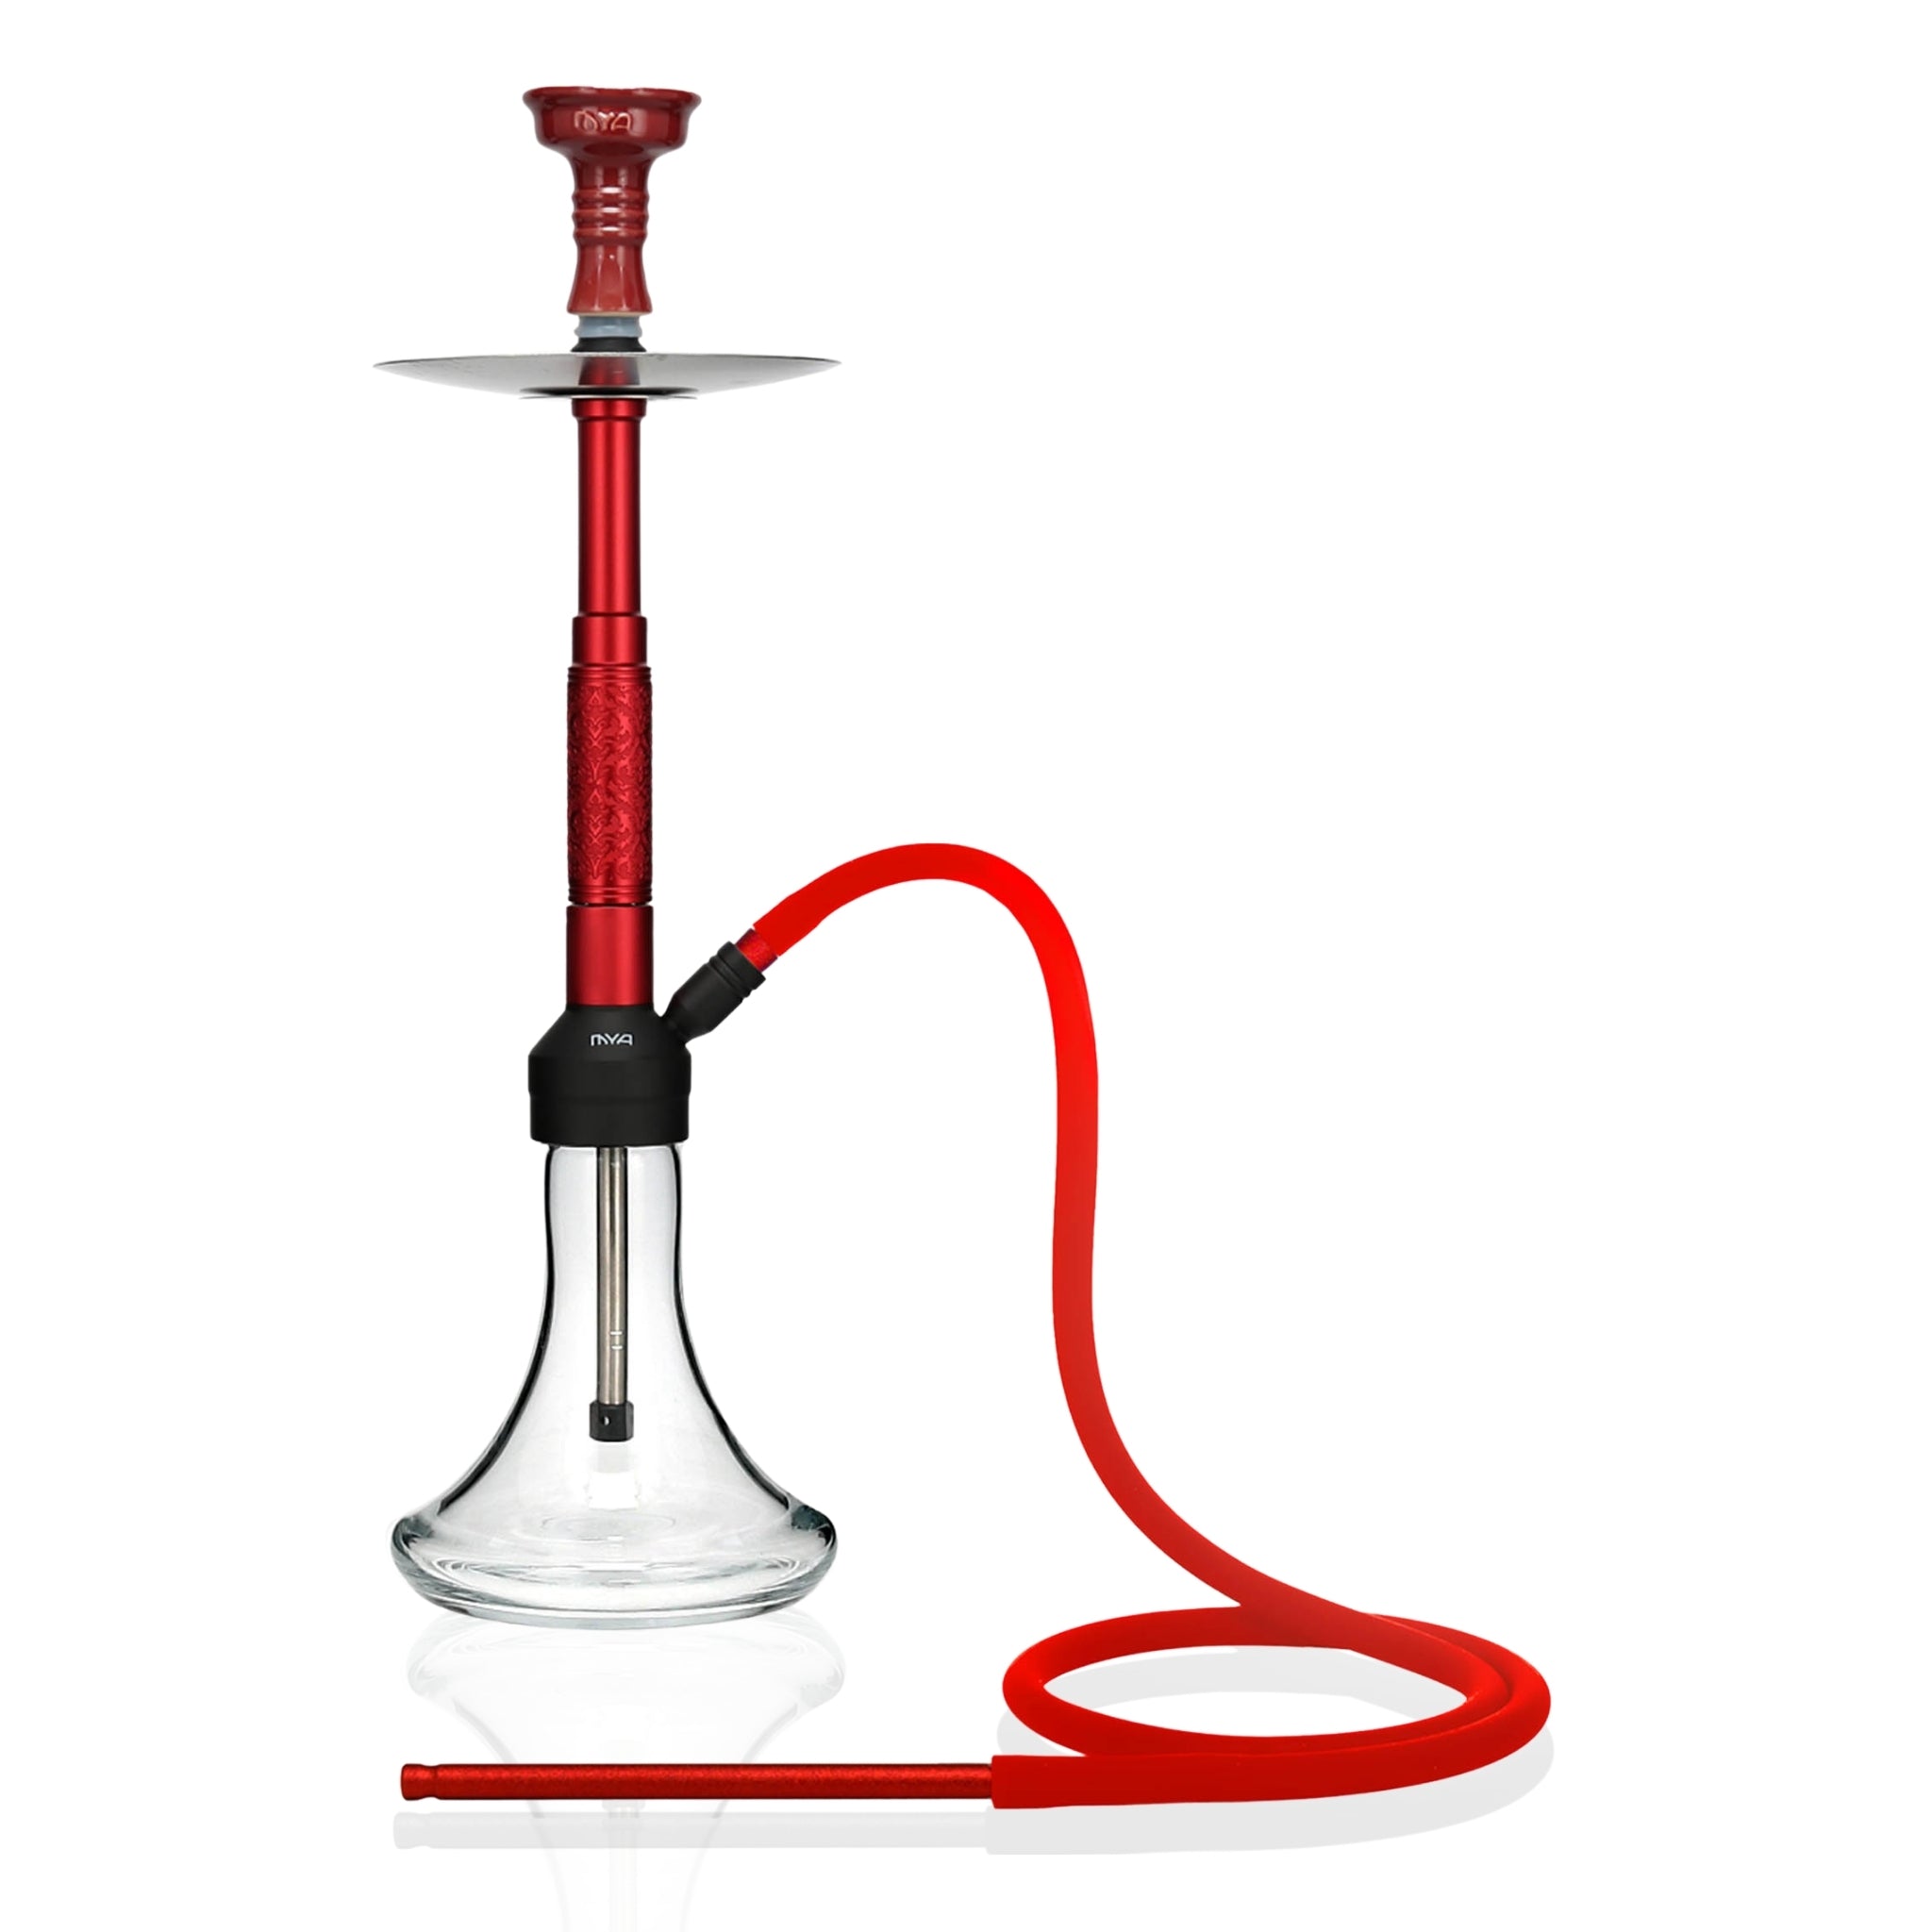 Red ORO-1A2 MYA Hookah #color_Red